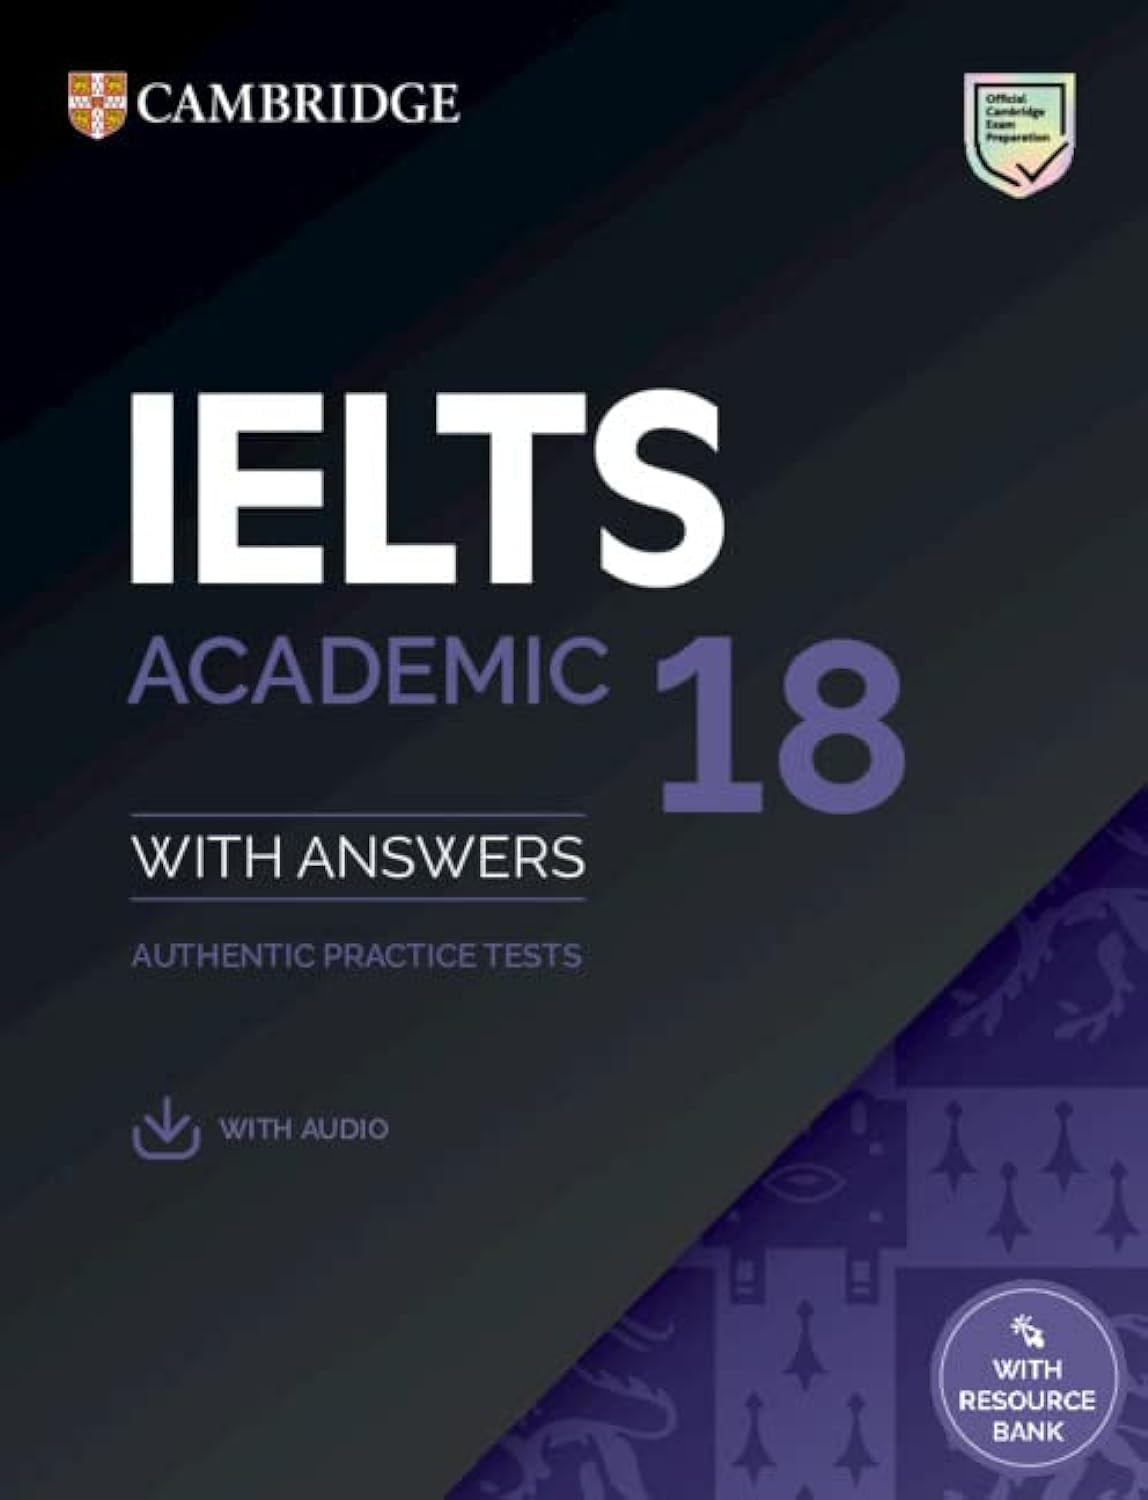 Cambridge - IELTS 18 Academic Student's Book with Answers with Audio with Resource Bank (Cambridge IELTS Self-Study Packs)